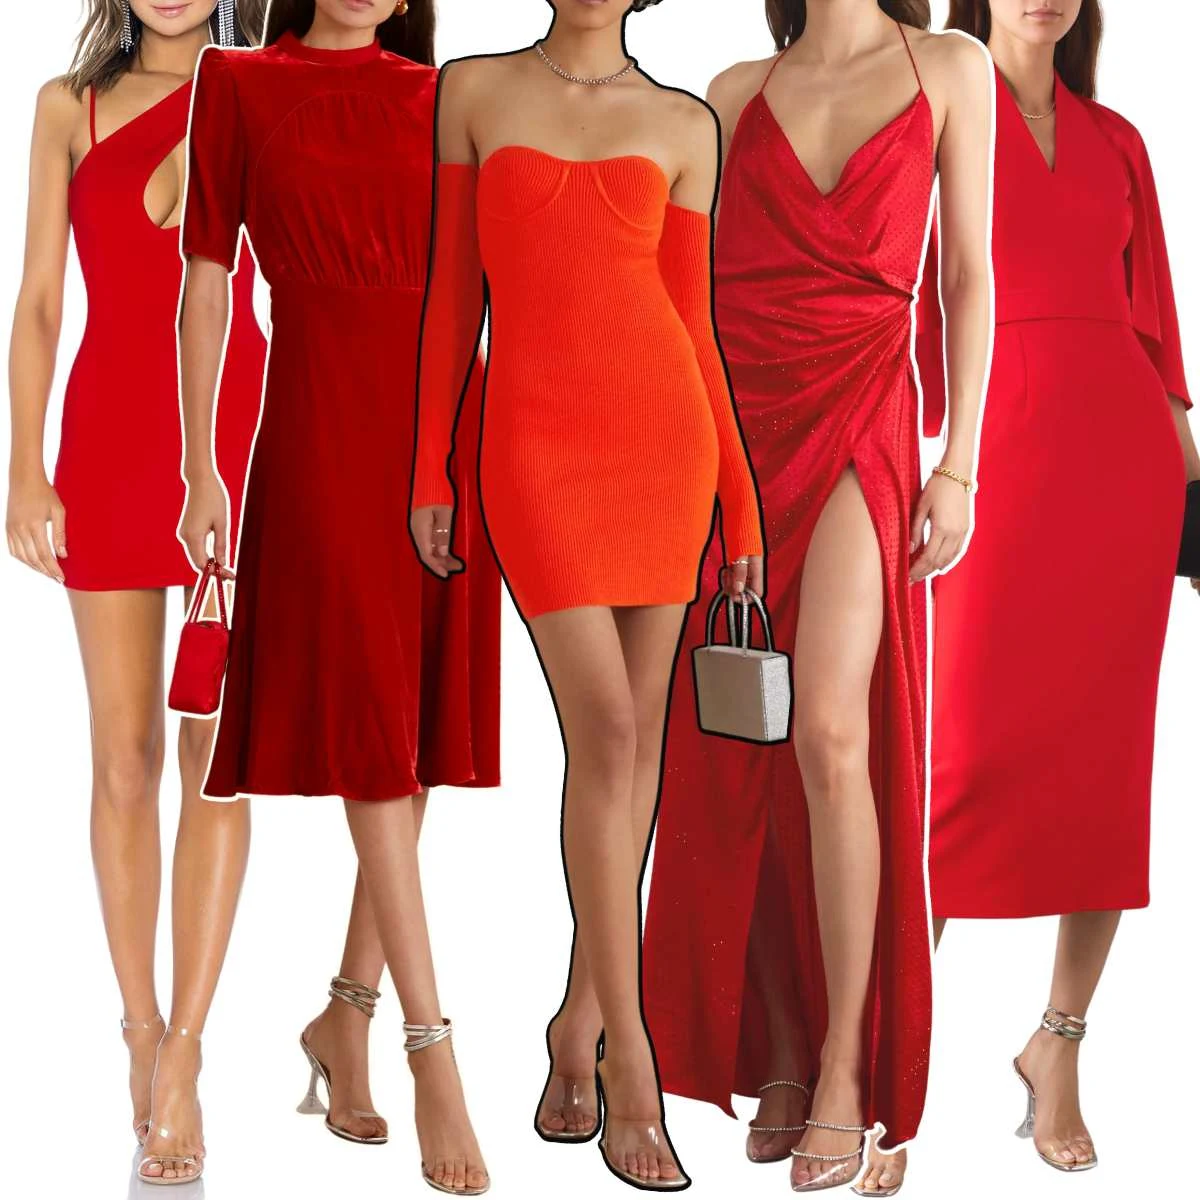 Collage of 5 women wearing different color shoes with a red dress.